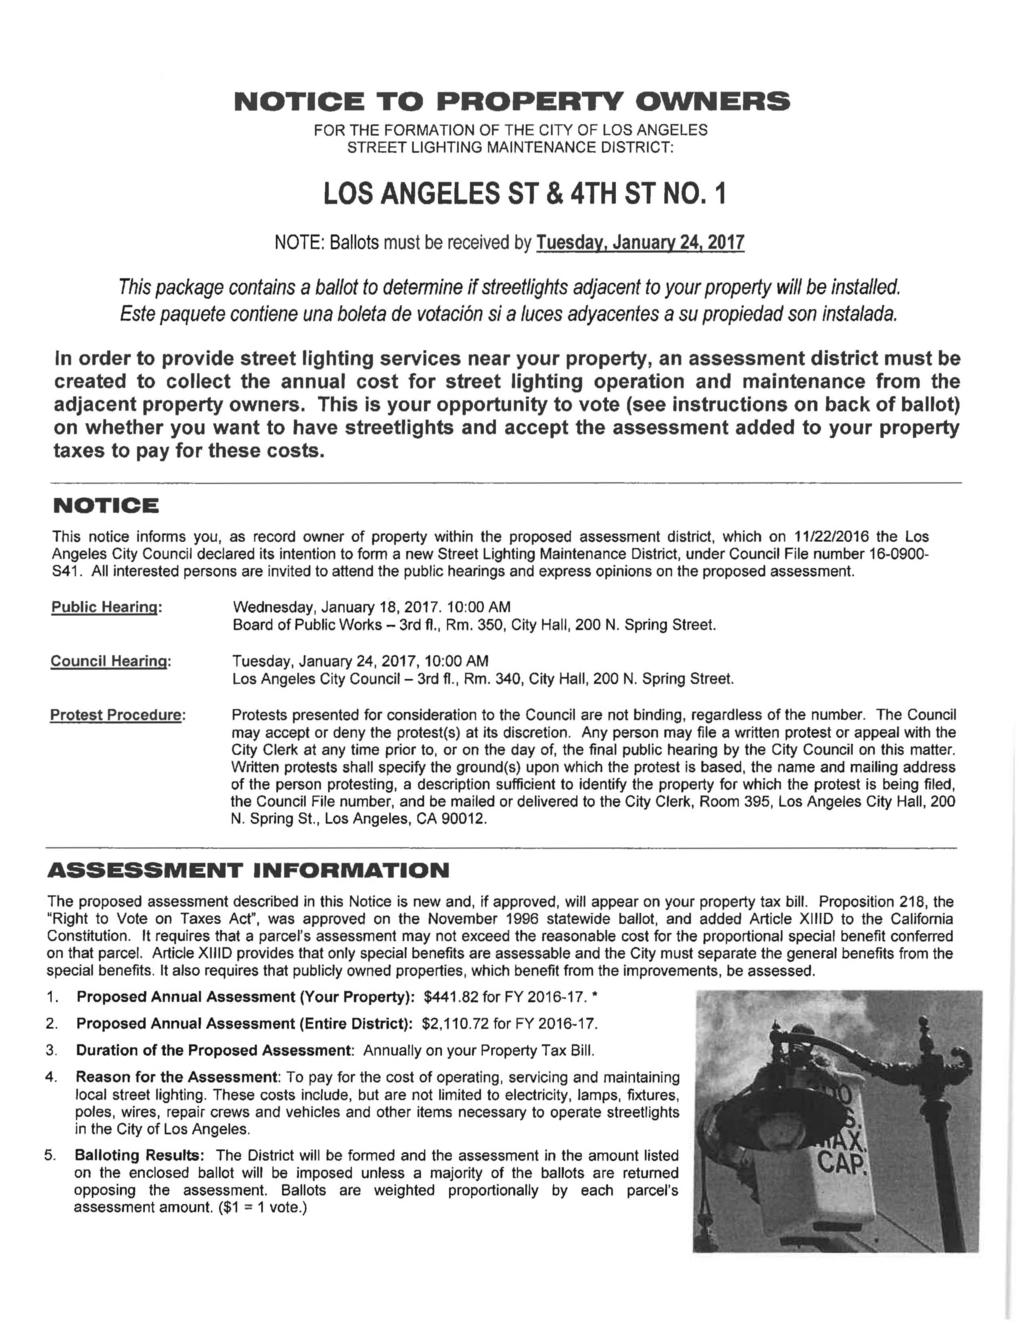 NOTICE TO PROPERTY OWNERS FOR THE FORMATION OF THE CITY OF LOS ANGELES STREET LIGHTING MAINTENANCE DISTRICT: LOS ANGELES ST & 4TH ST NO.